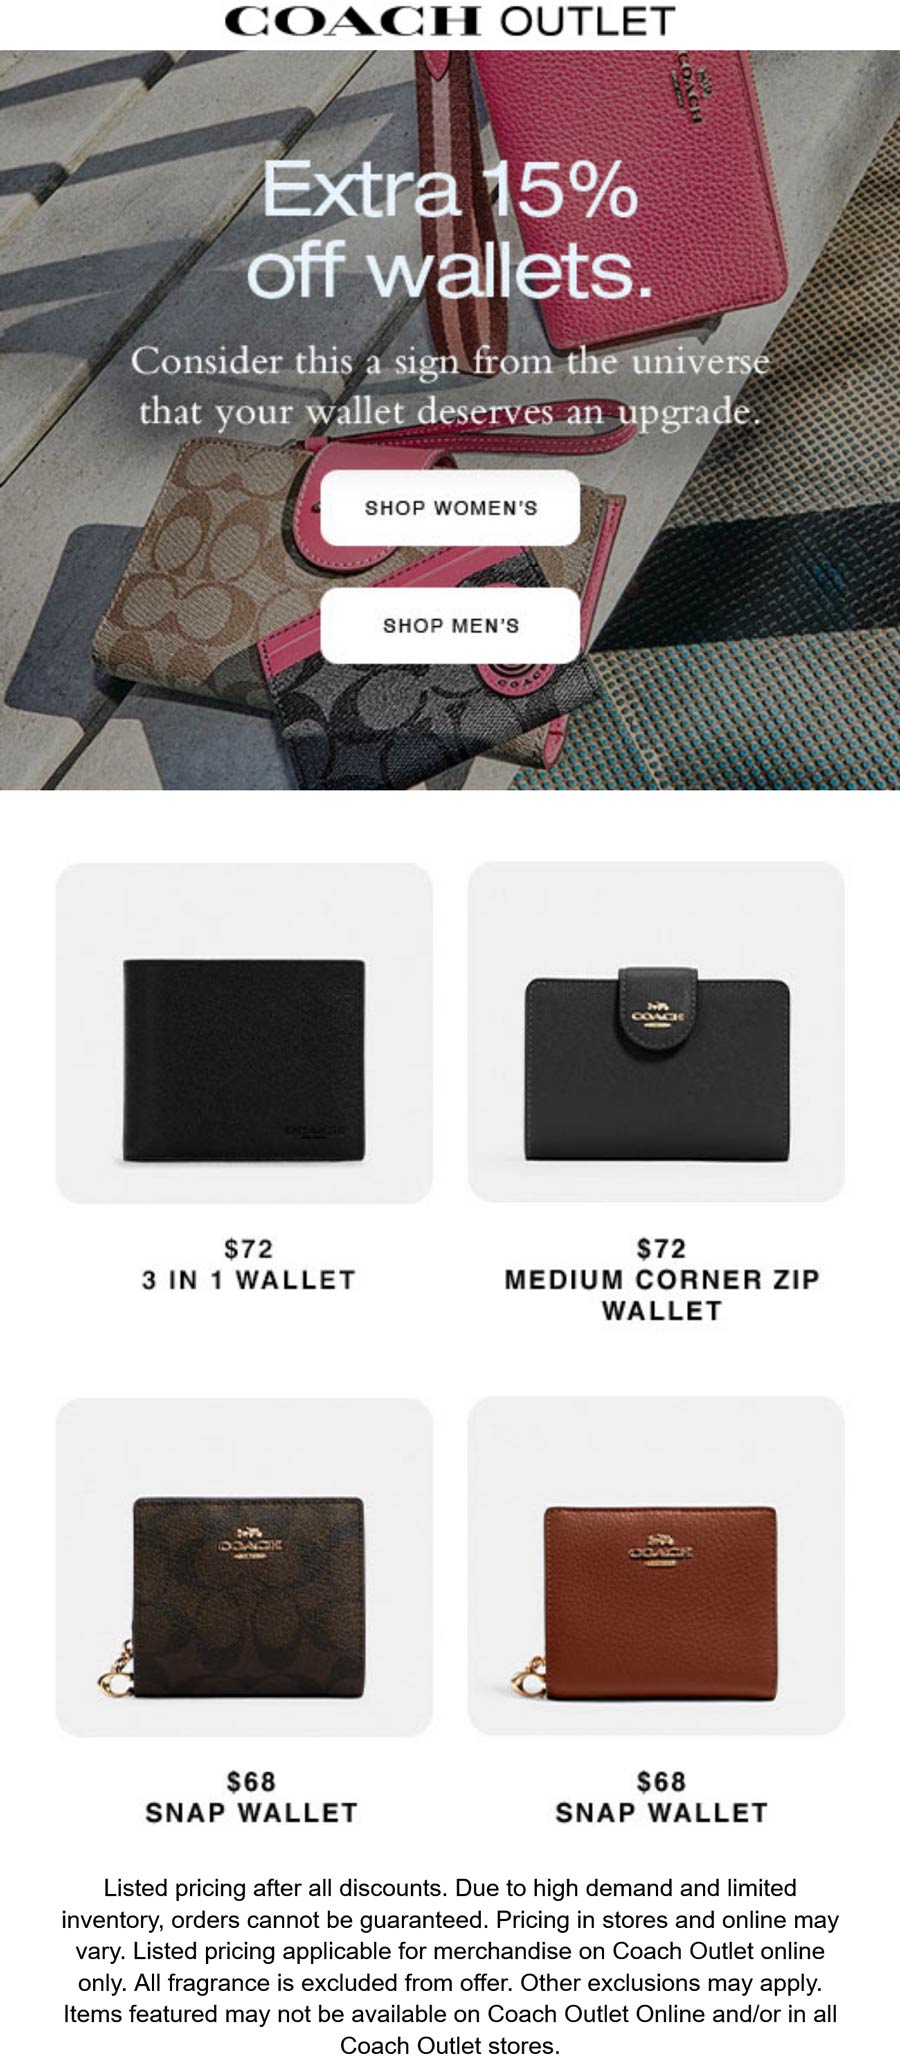 Coach Outlet stores Coupon  Extra 15% off wallets at Coach Outlet #coachoutlet 